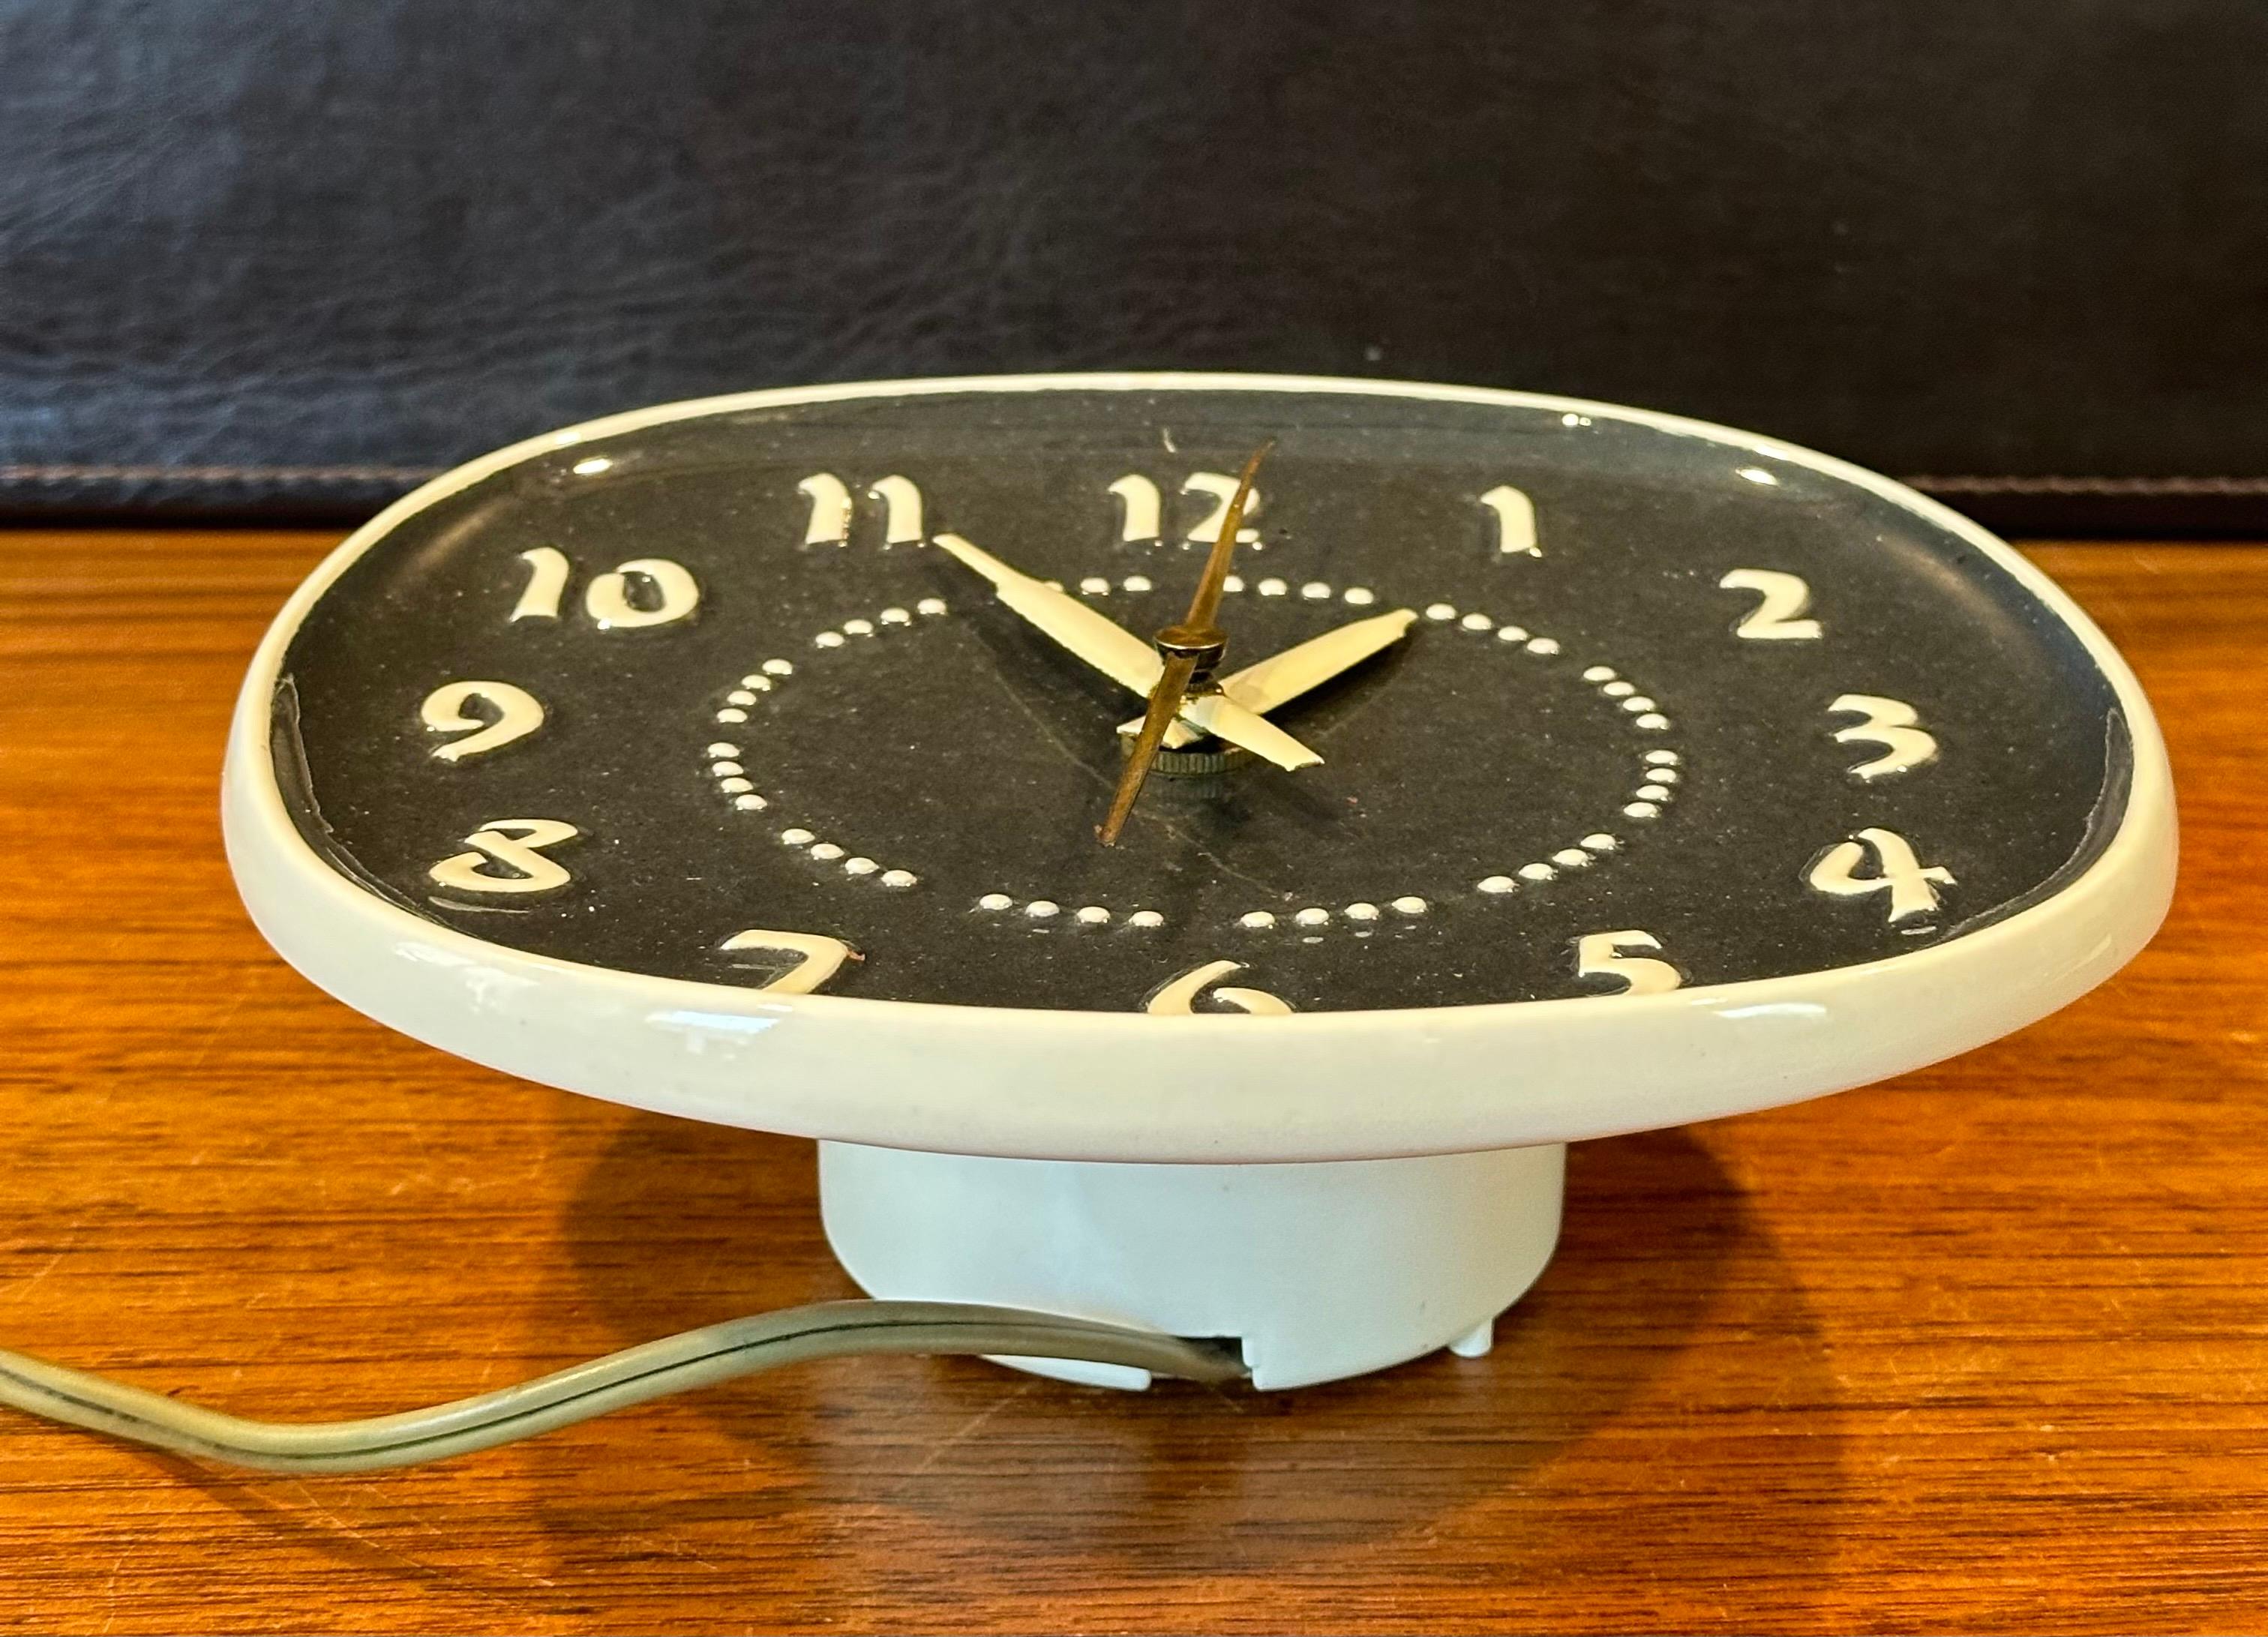 American Modern Ceramic Wall Clock by Russel Wright for General Electric In Good Condition For Sale In San Diego, CA